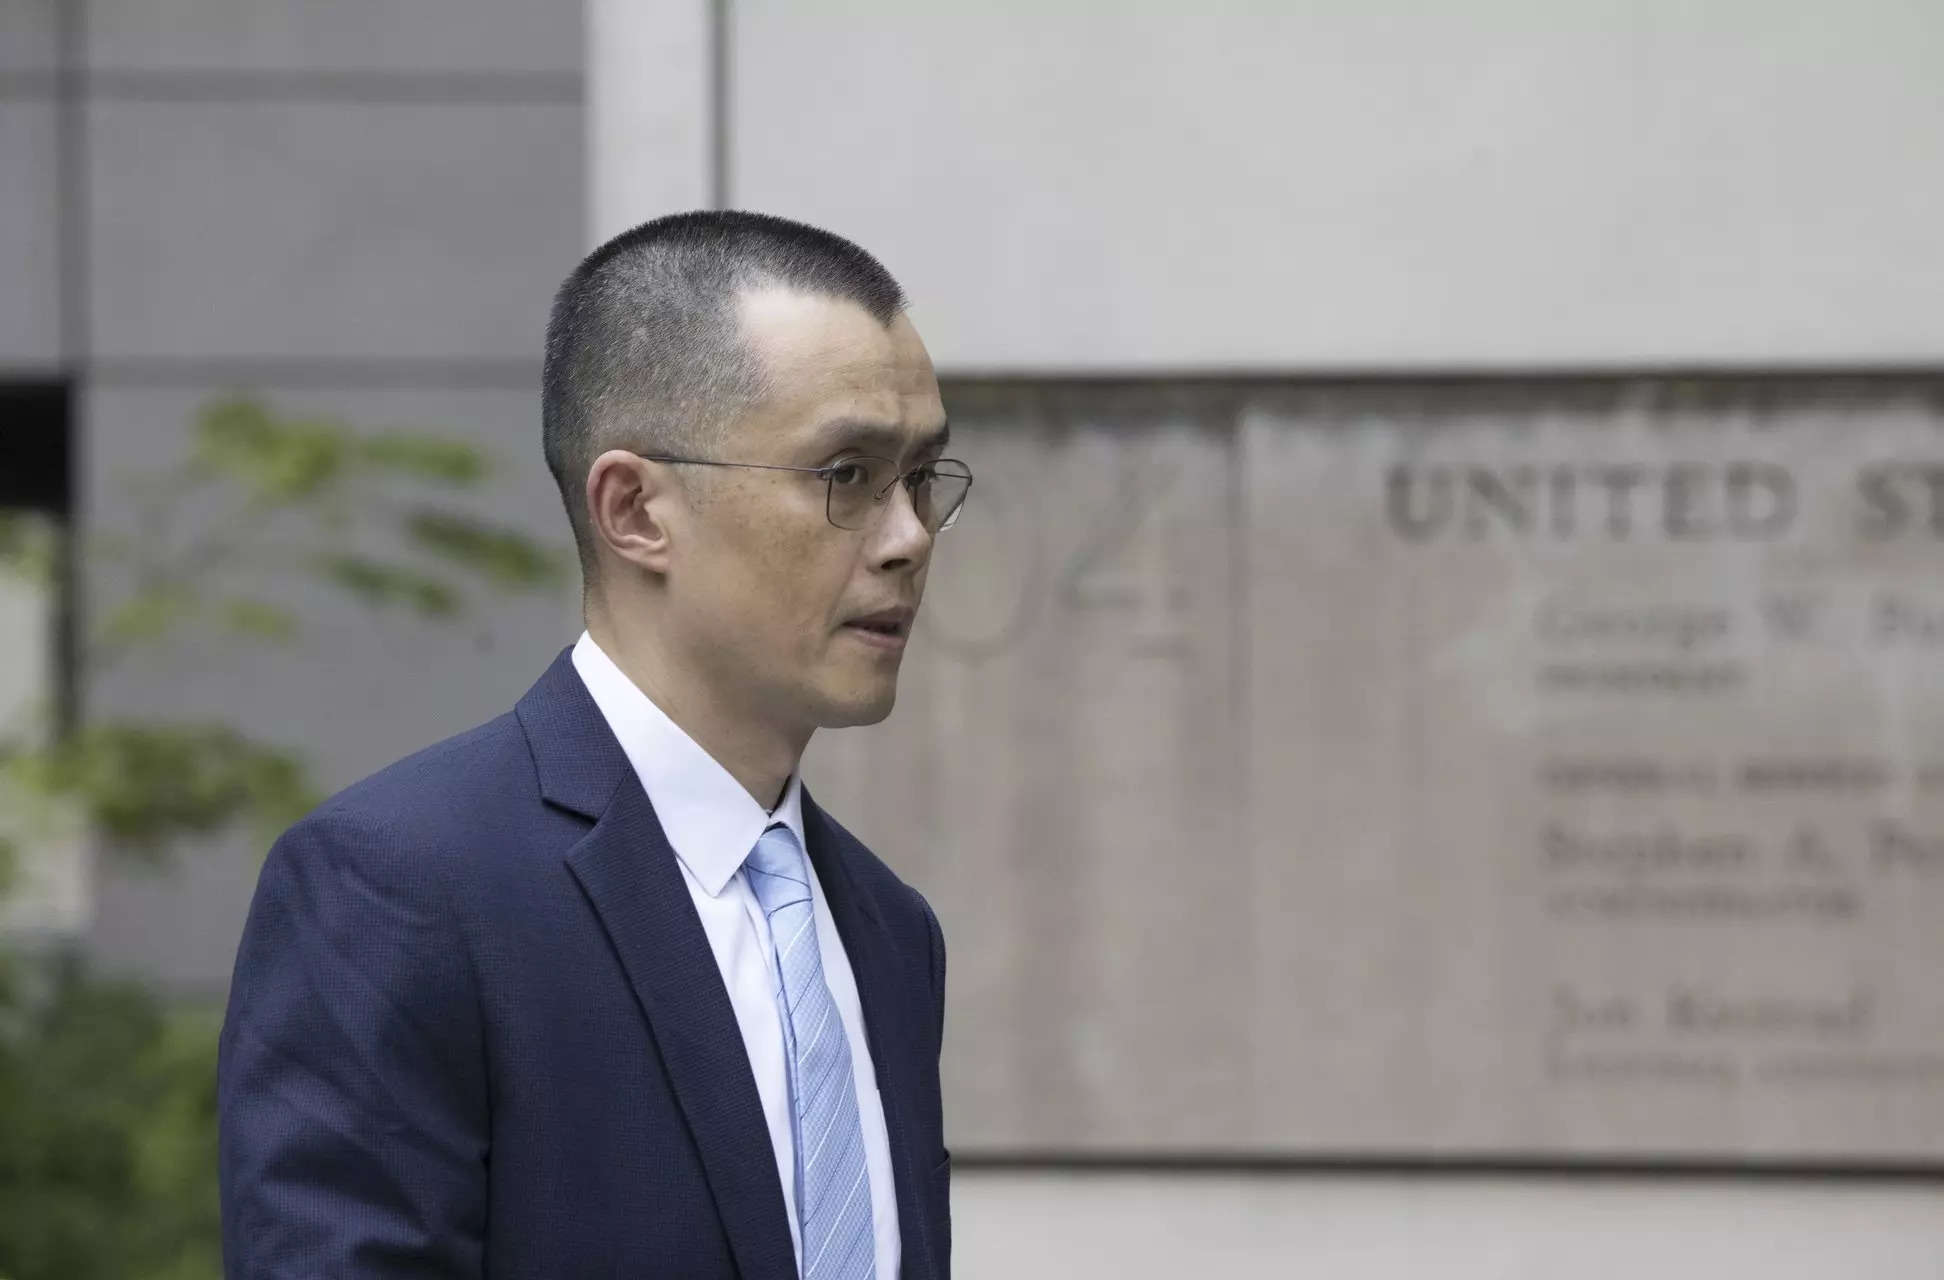 Binance crypto founder Zhao sentenced to 4 months in prison